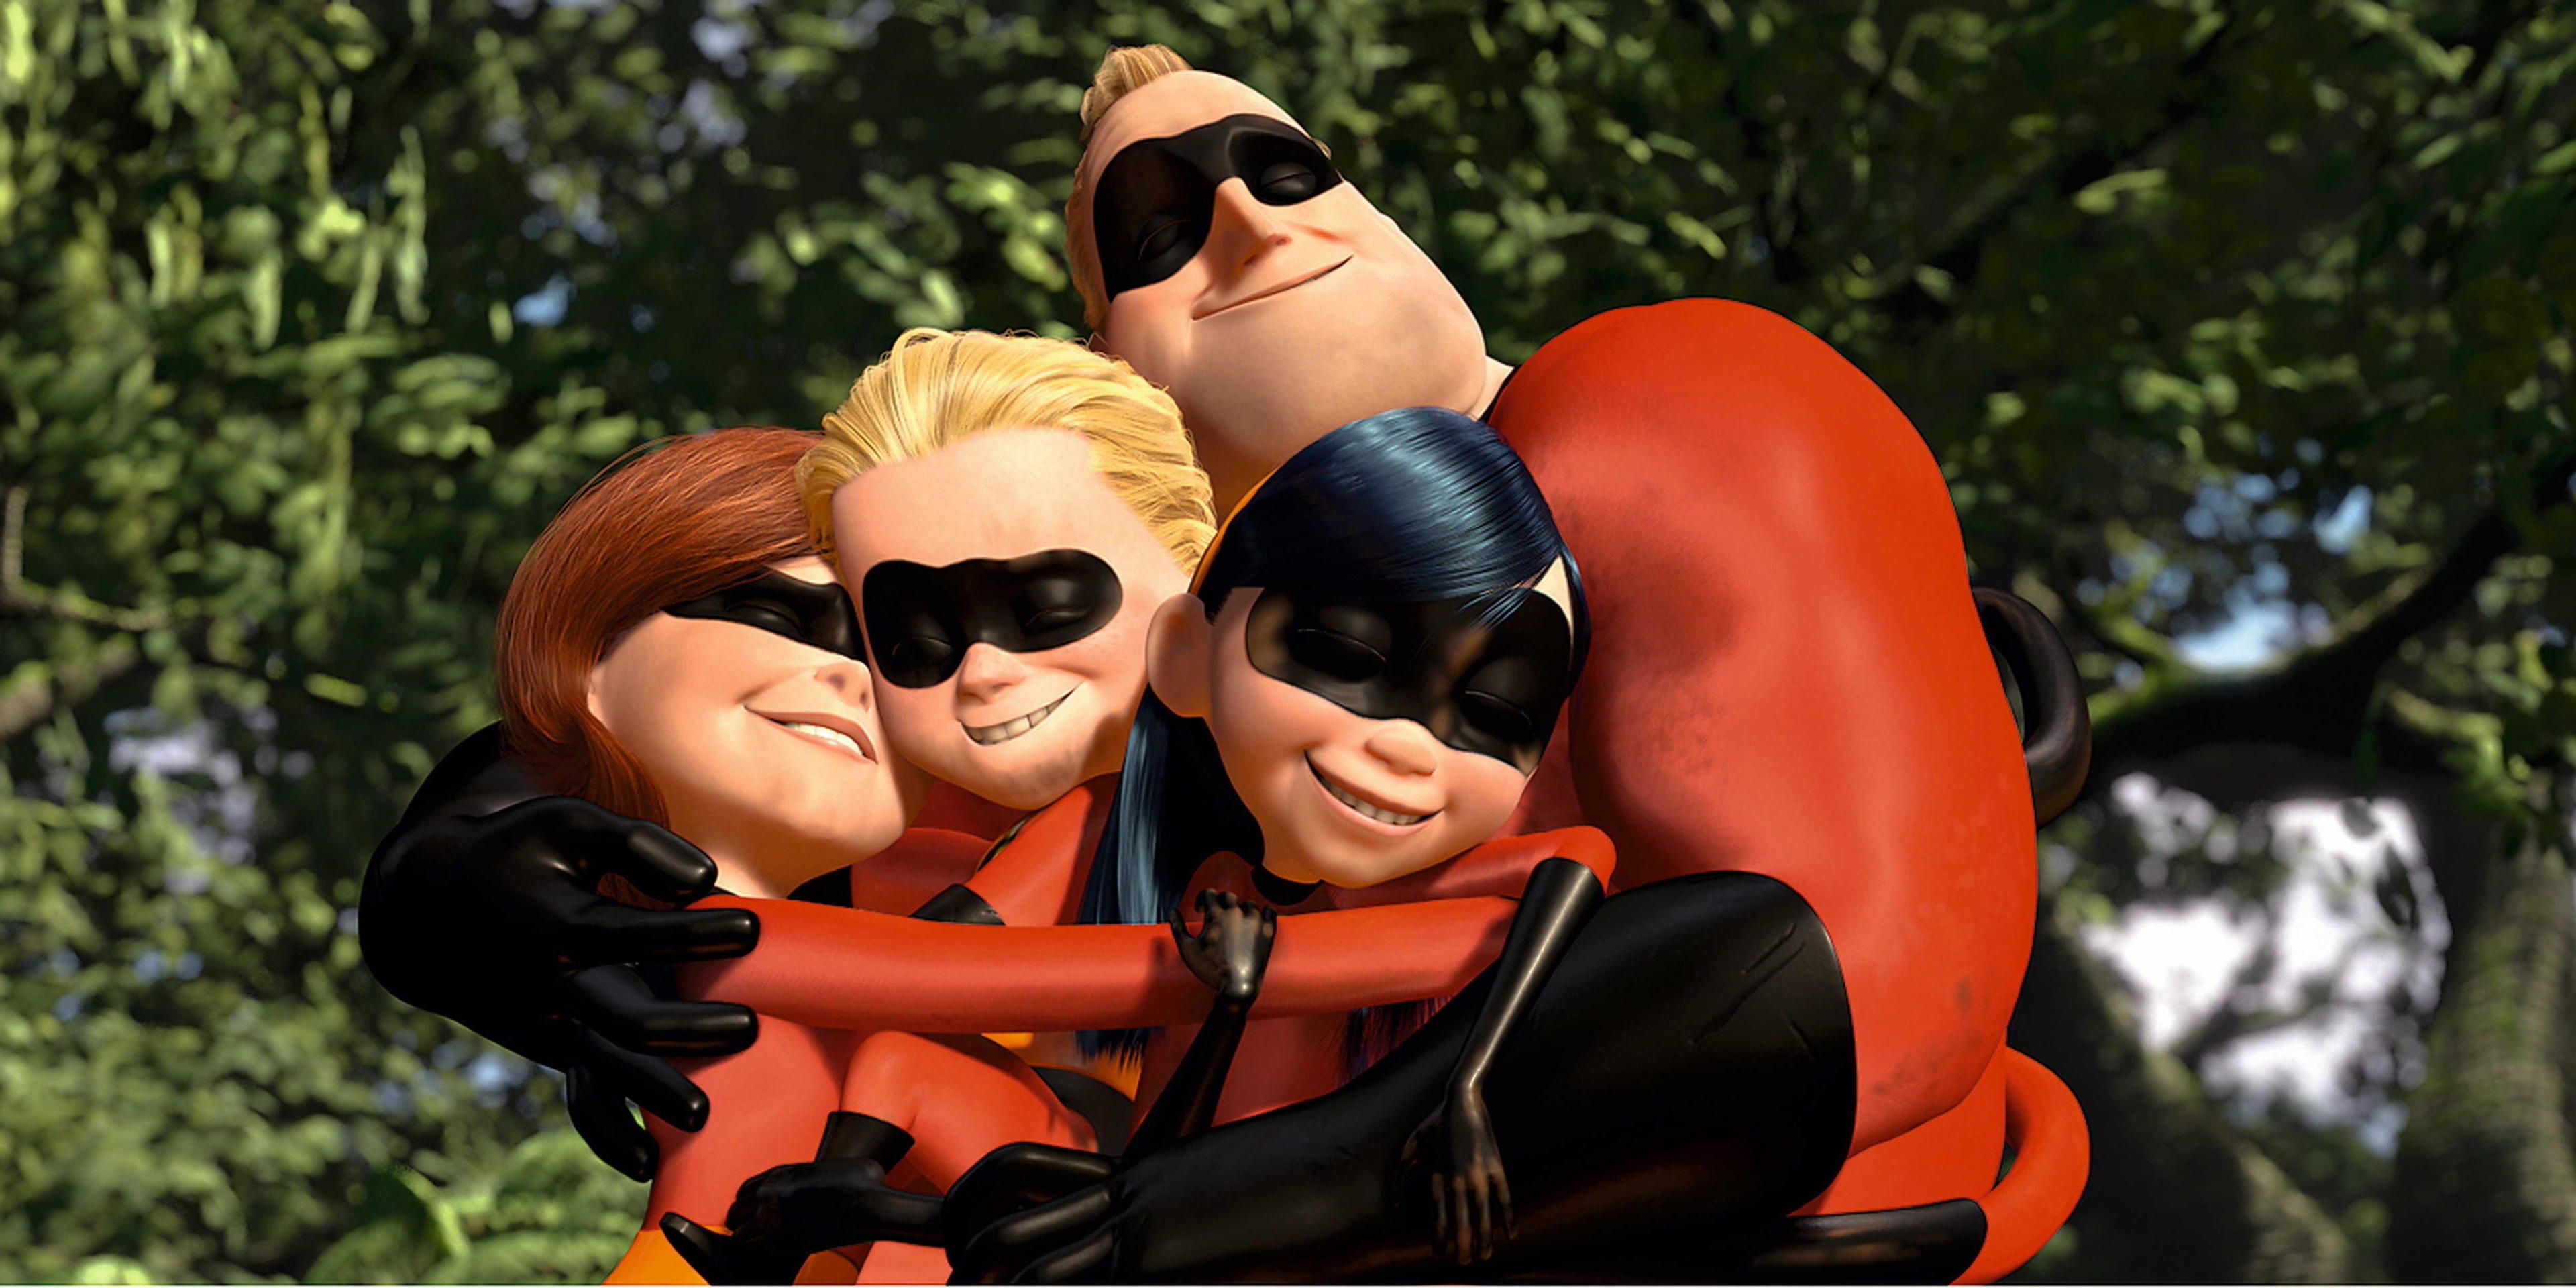 A still from The Incredibles